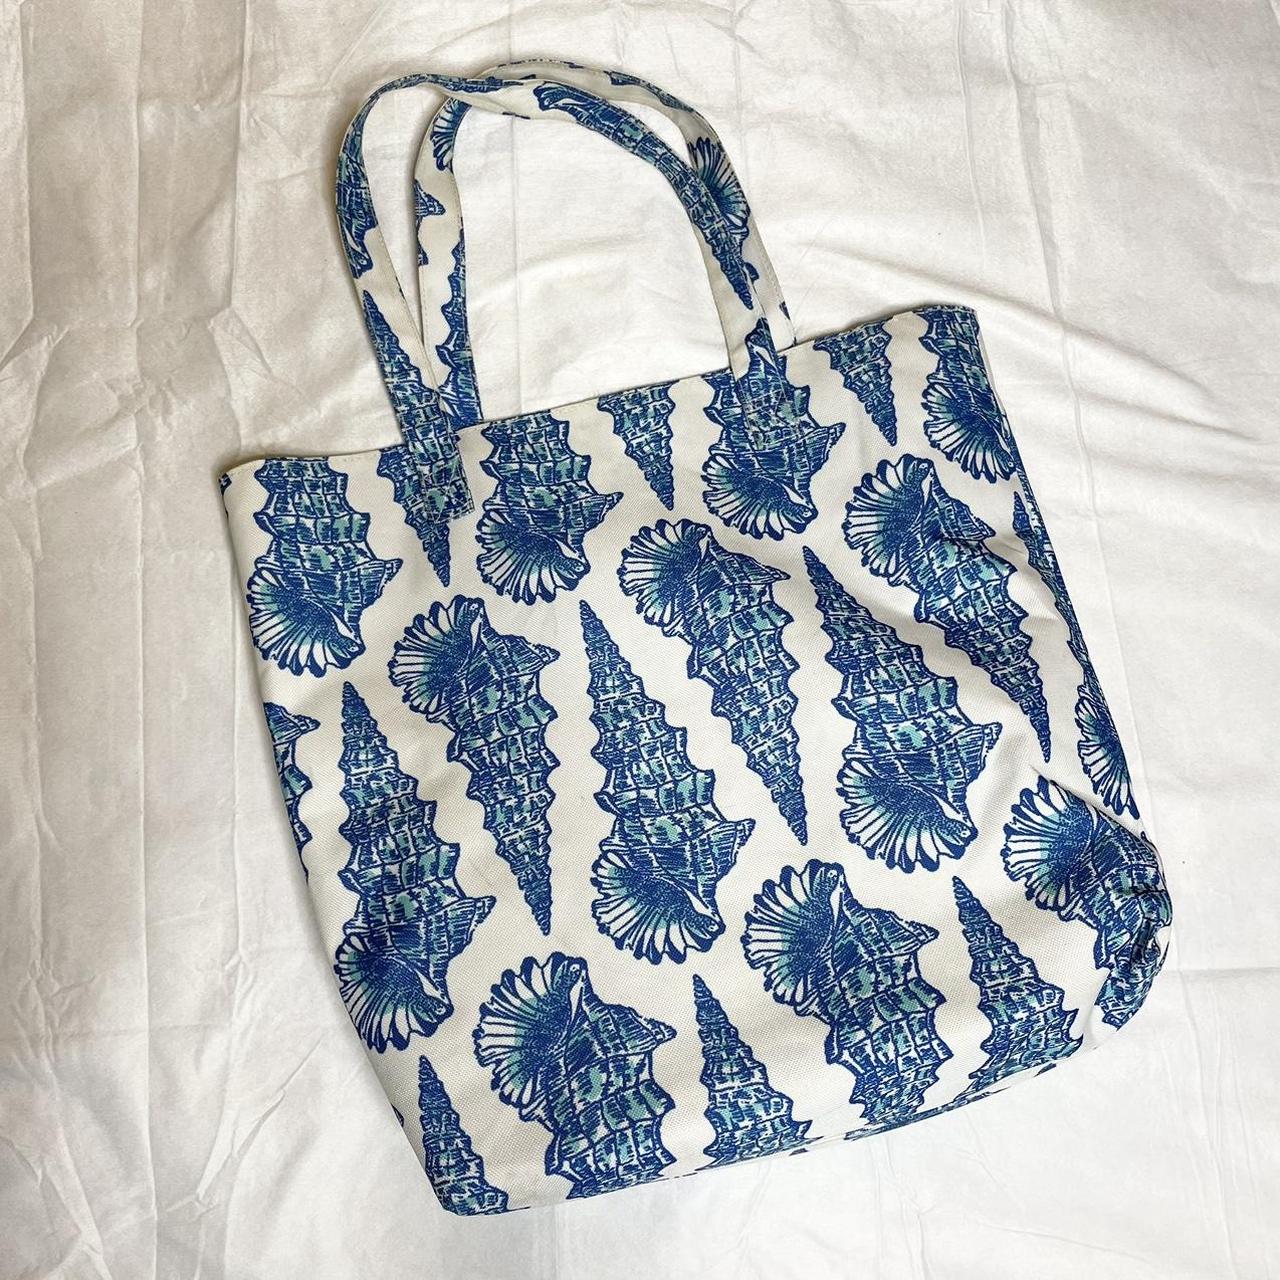 Lilly Pulitzer Women's White and Blue Bag (2)